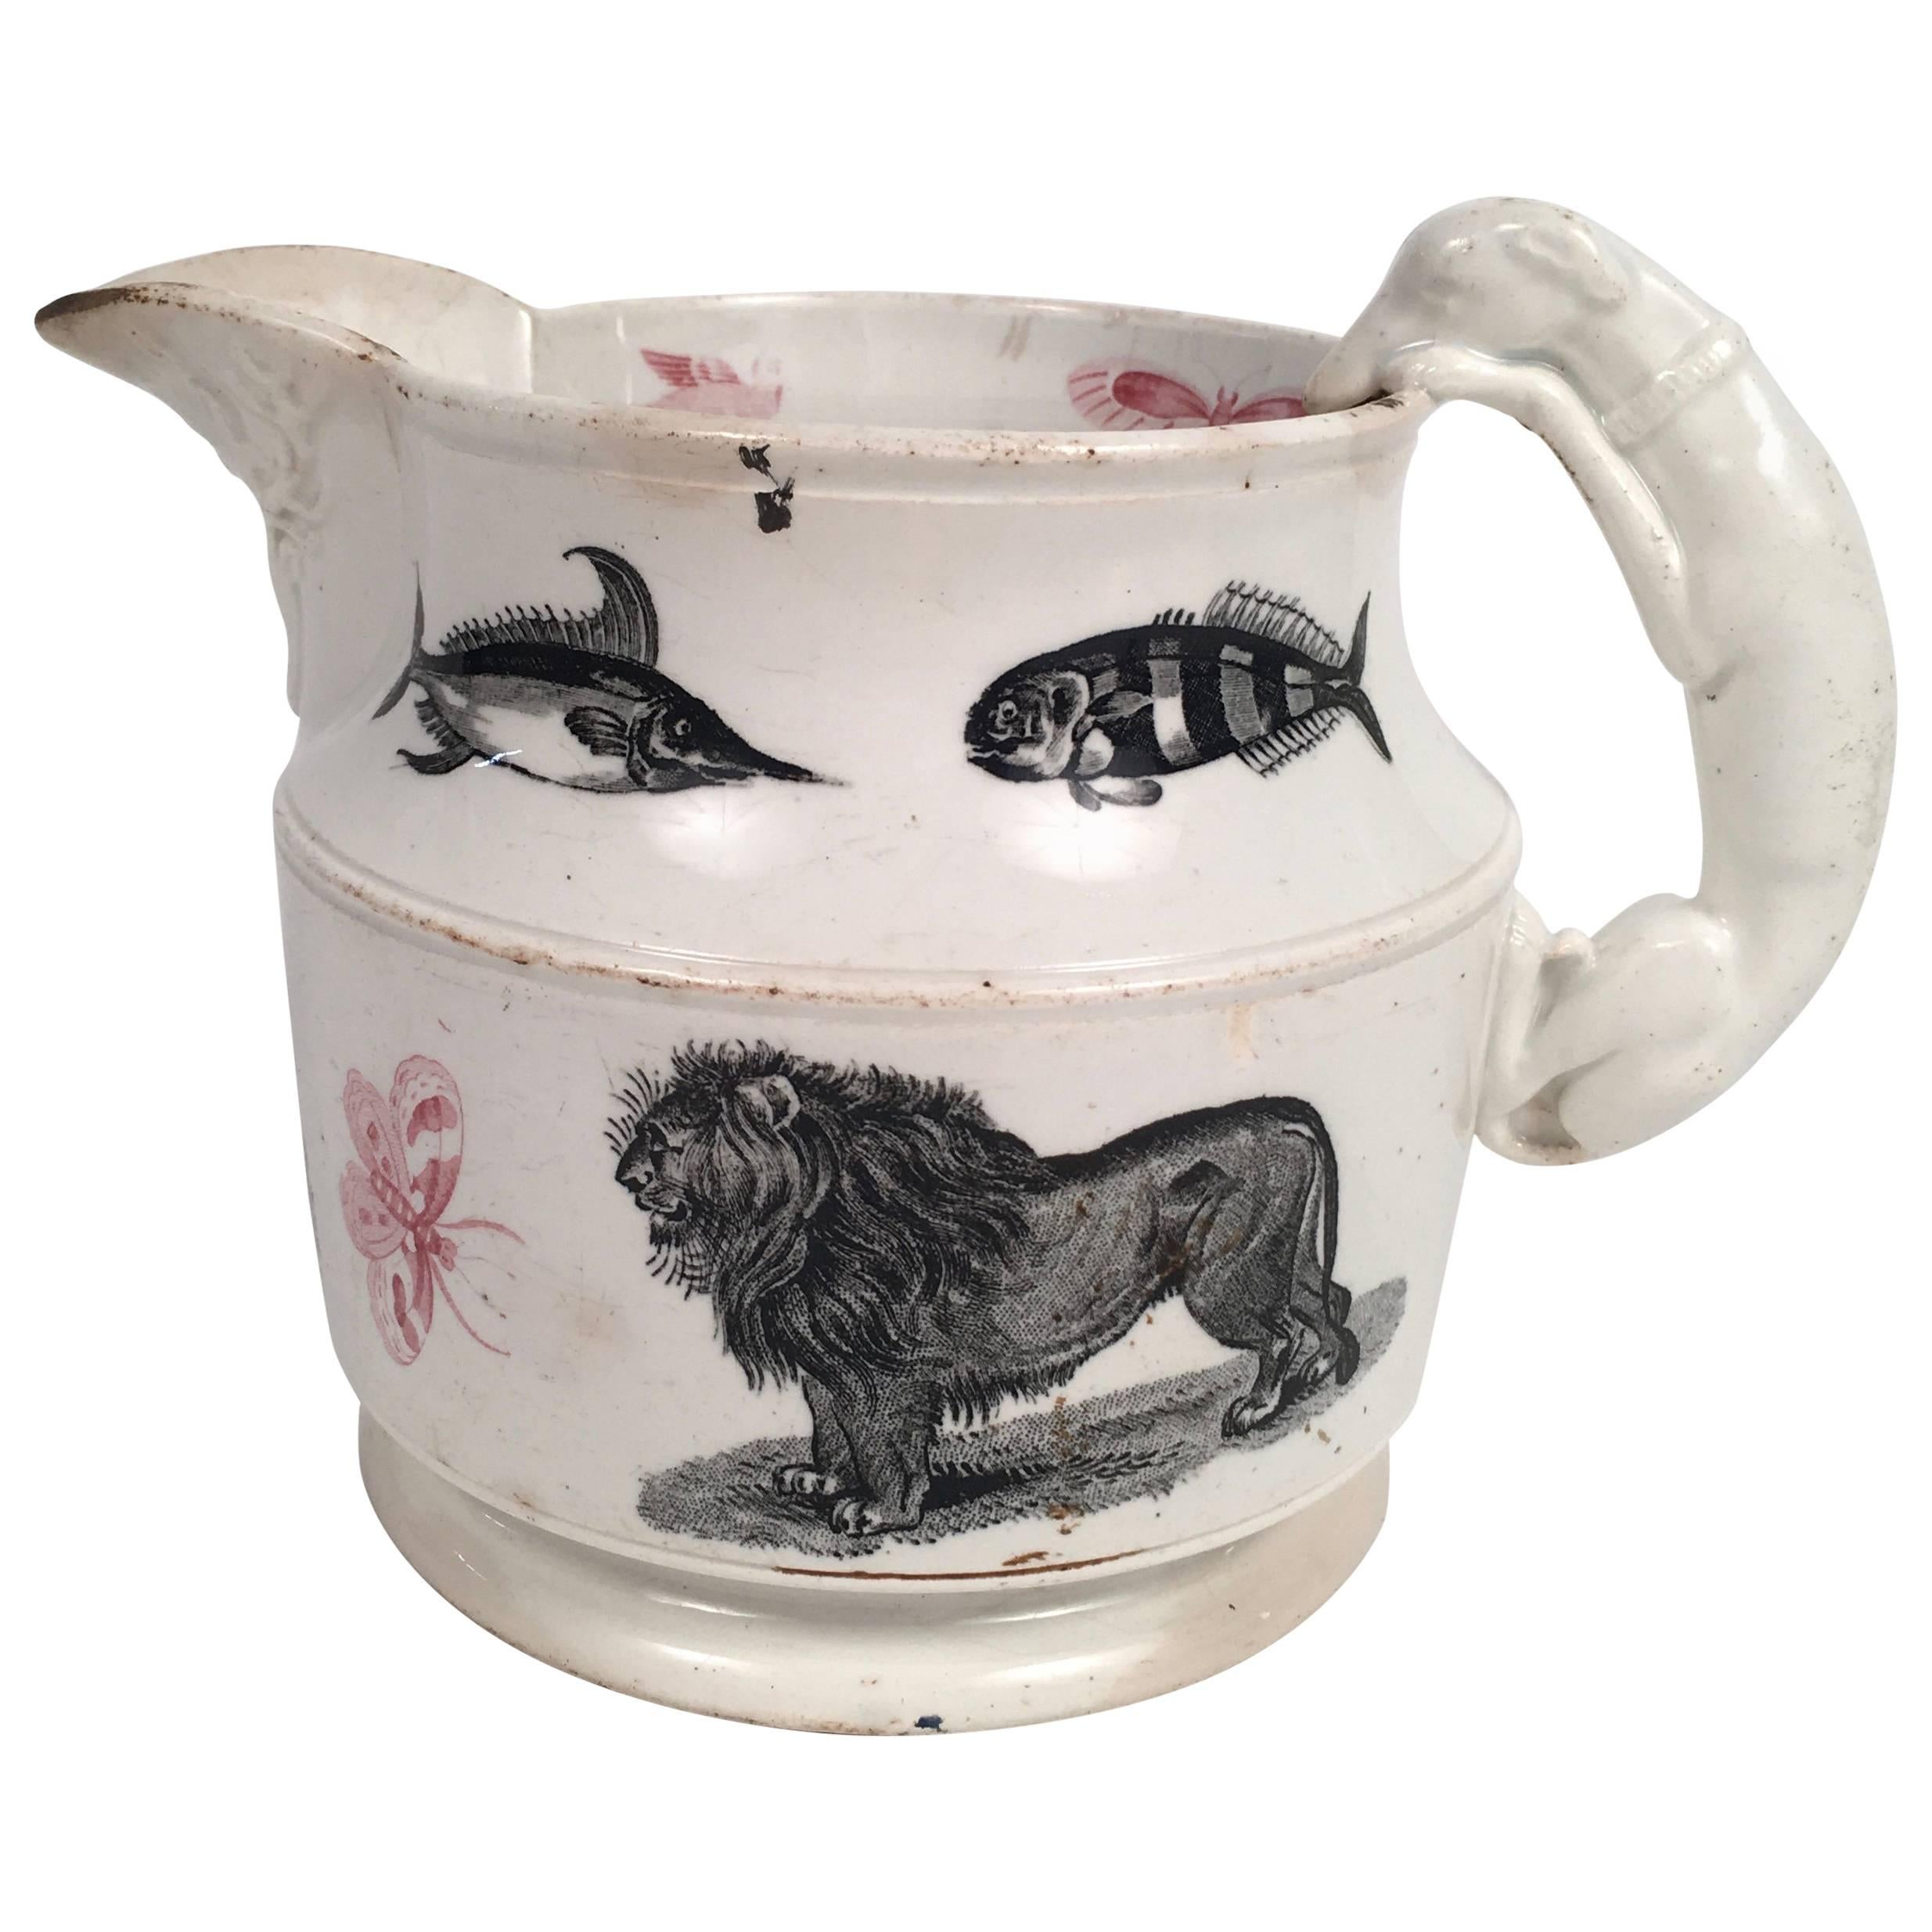 Staffordshire Menageries Animal Decorated Pitcher